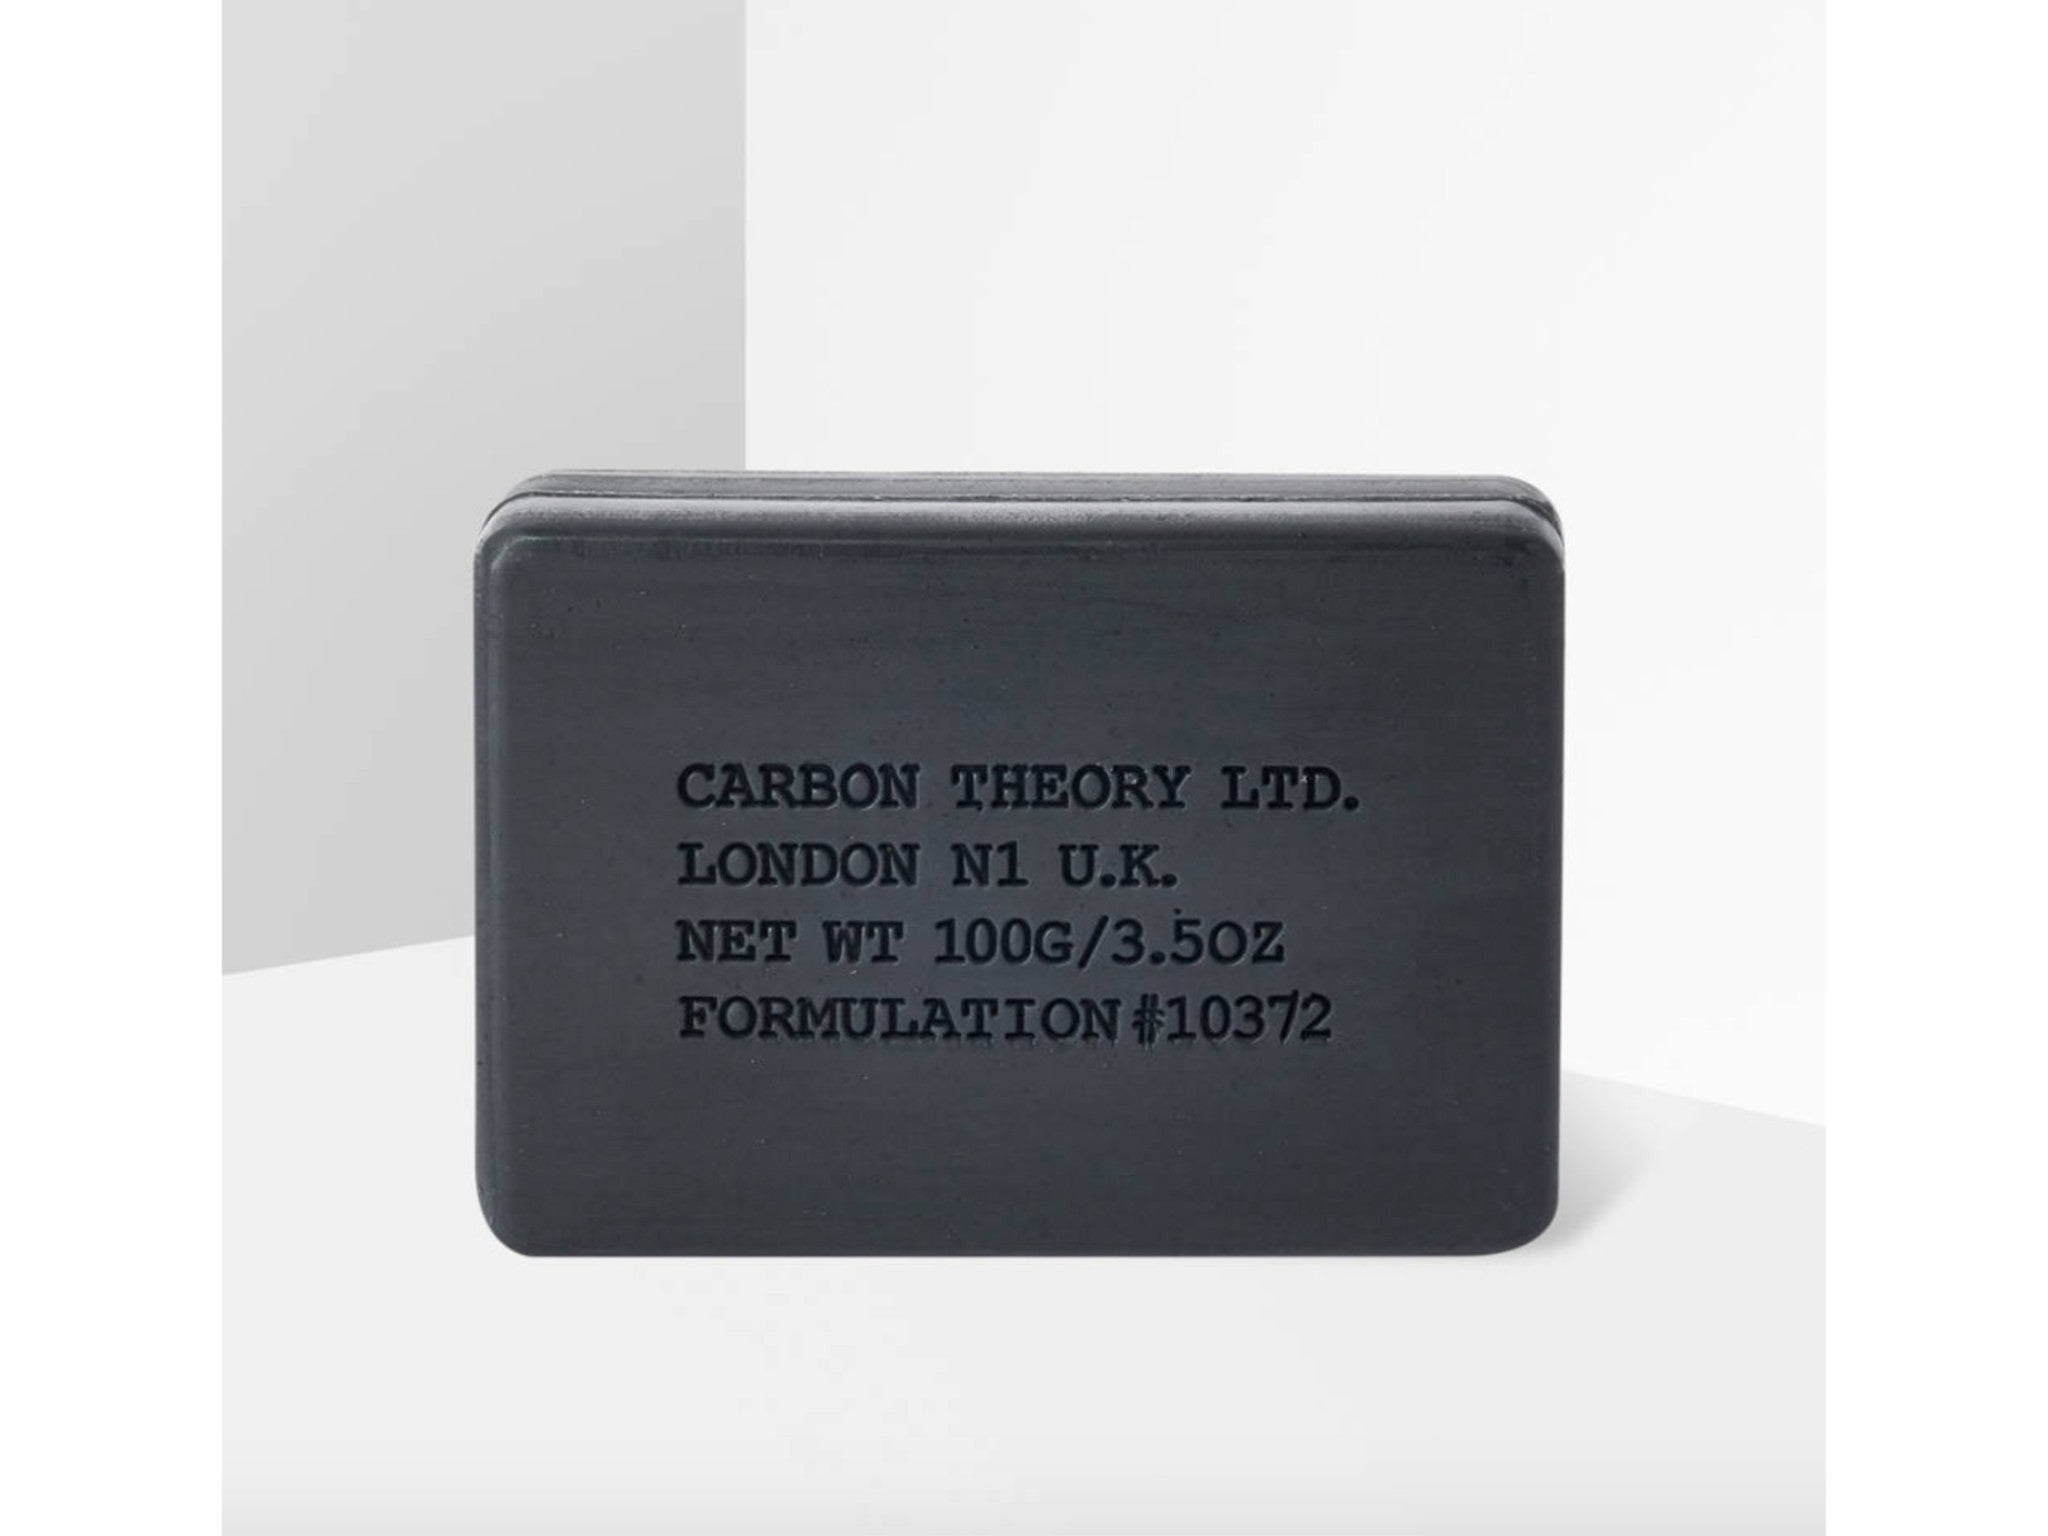 Carbon Theory charcoal and tea tree oil facial cleansing bar indybest.jpg